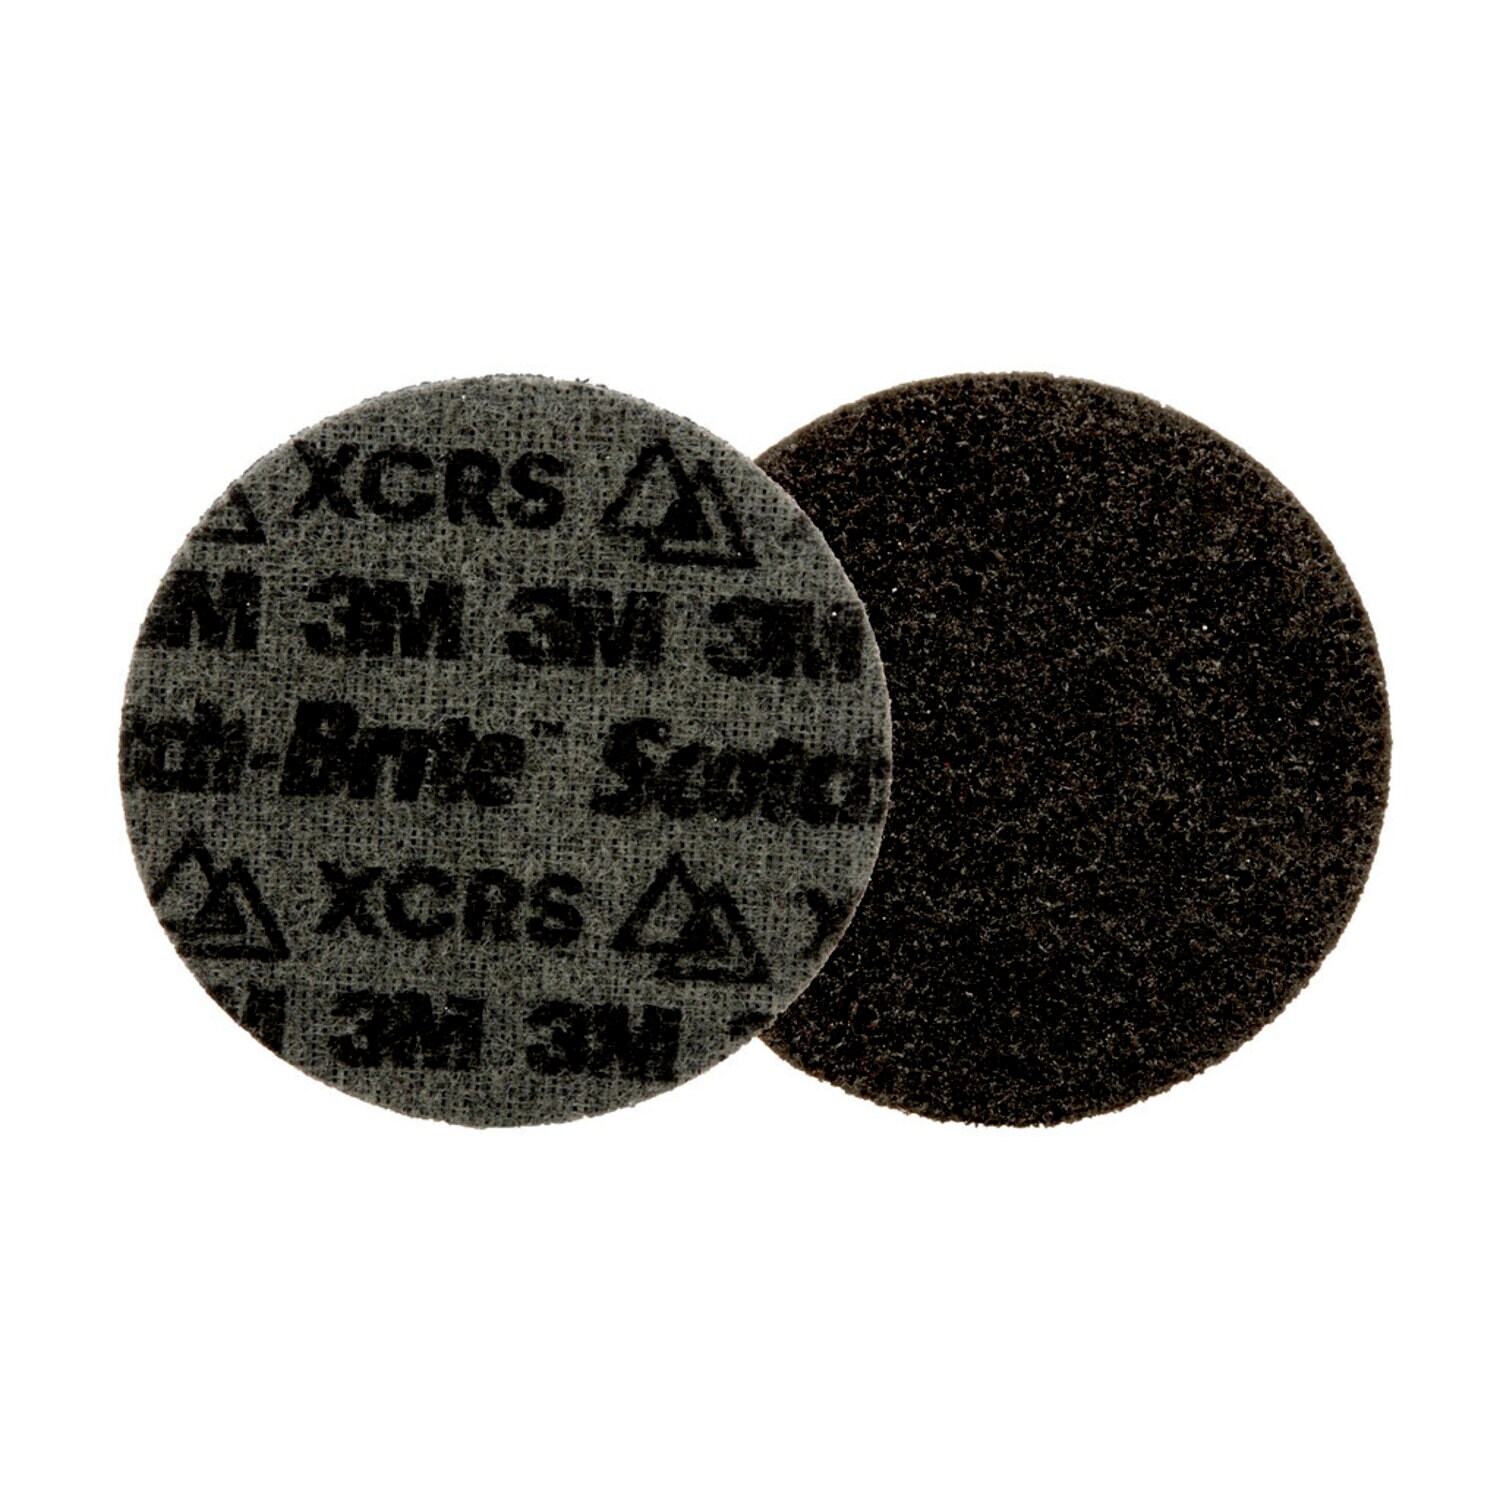 7100263910 - Scotch-Brite Precision Surface Conditioning Disc, PN-DH, Extra Coarse, 4-1/2 in x NH, 50 ea/Case